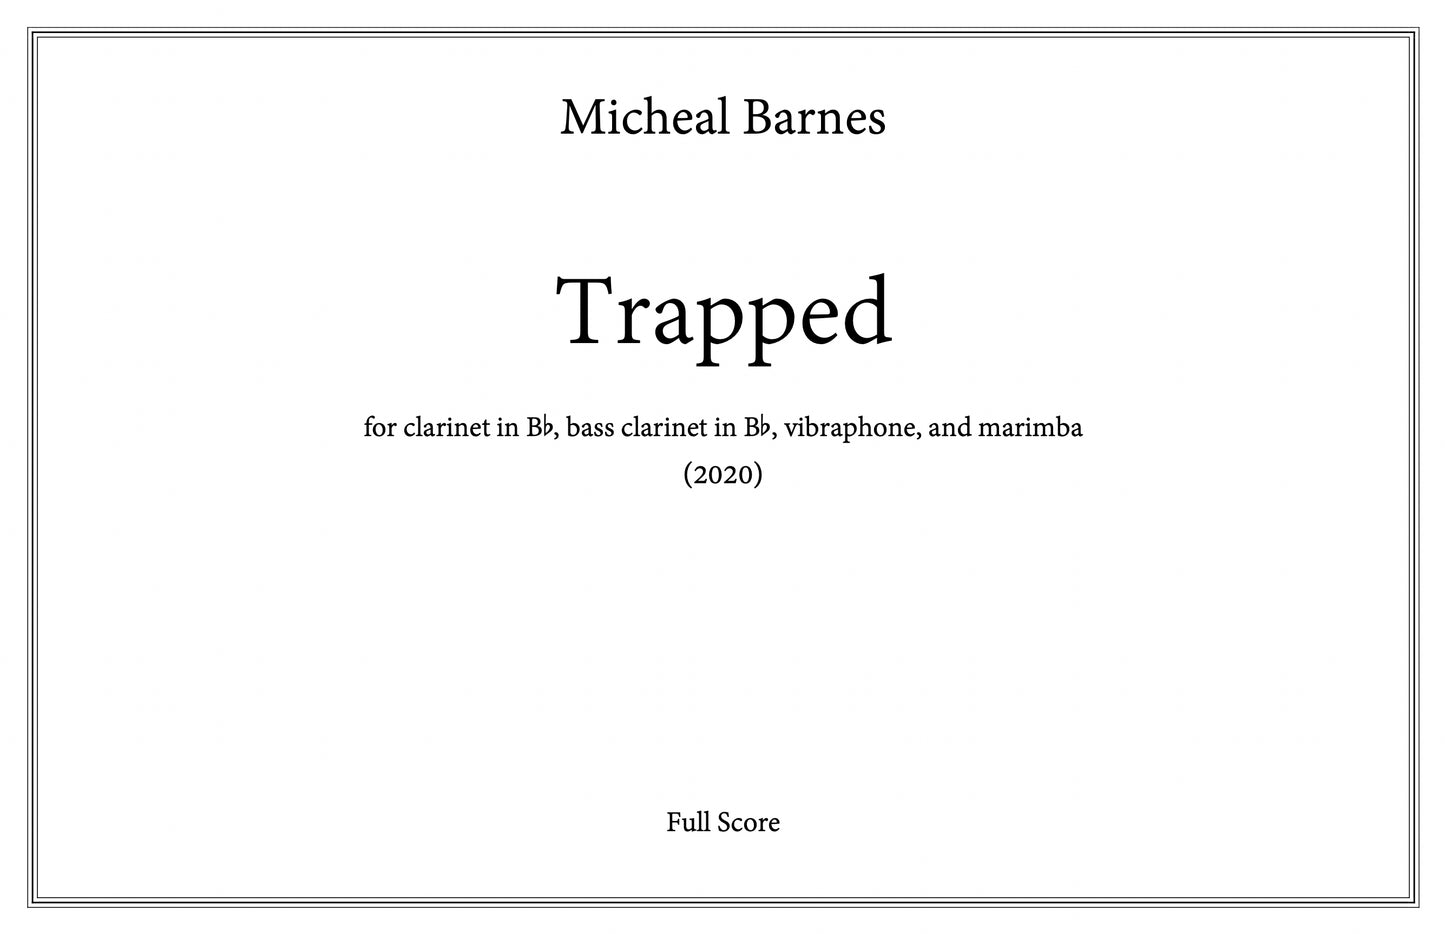 Trapped by Micheal Barnes (DIGITAL DOWNLOAD)